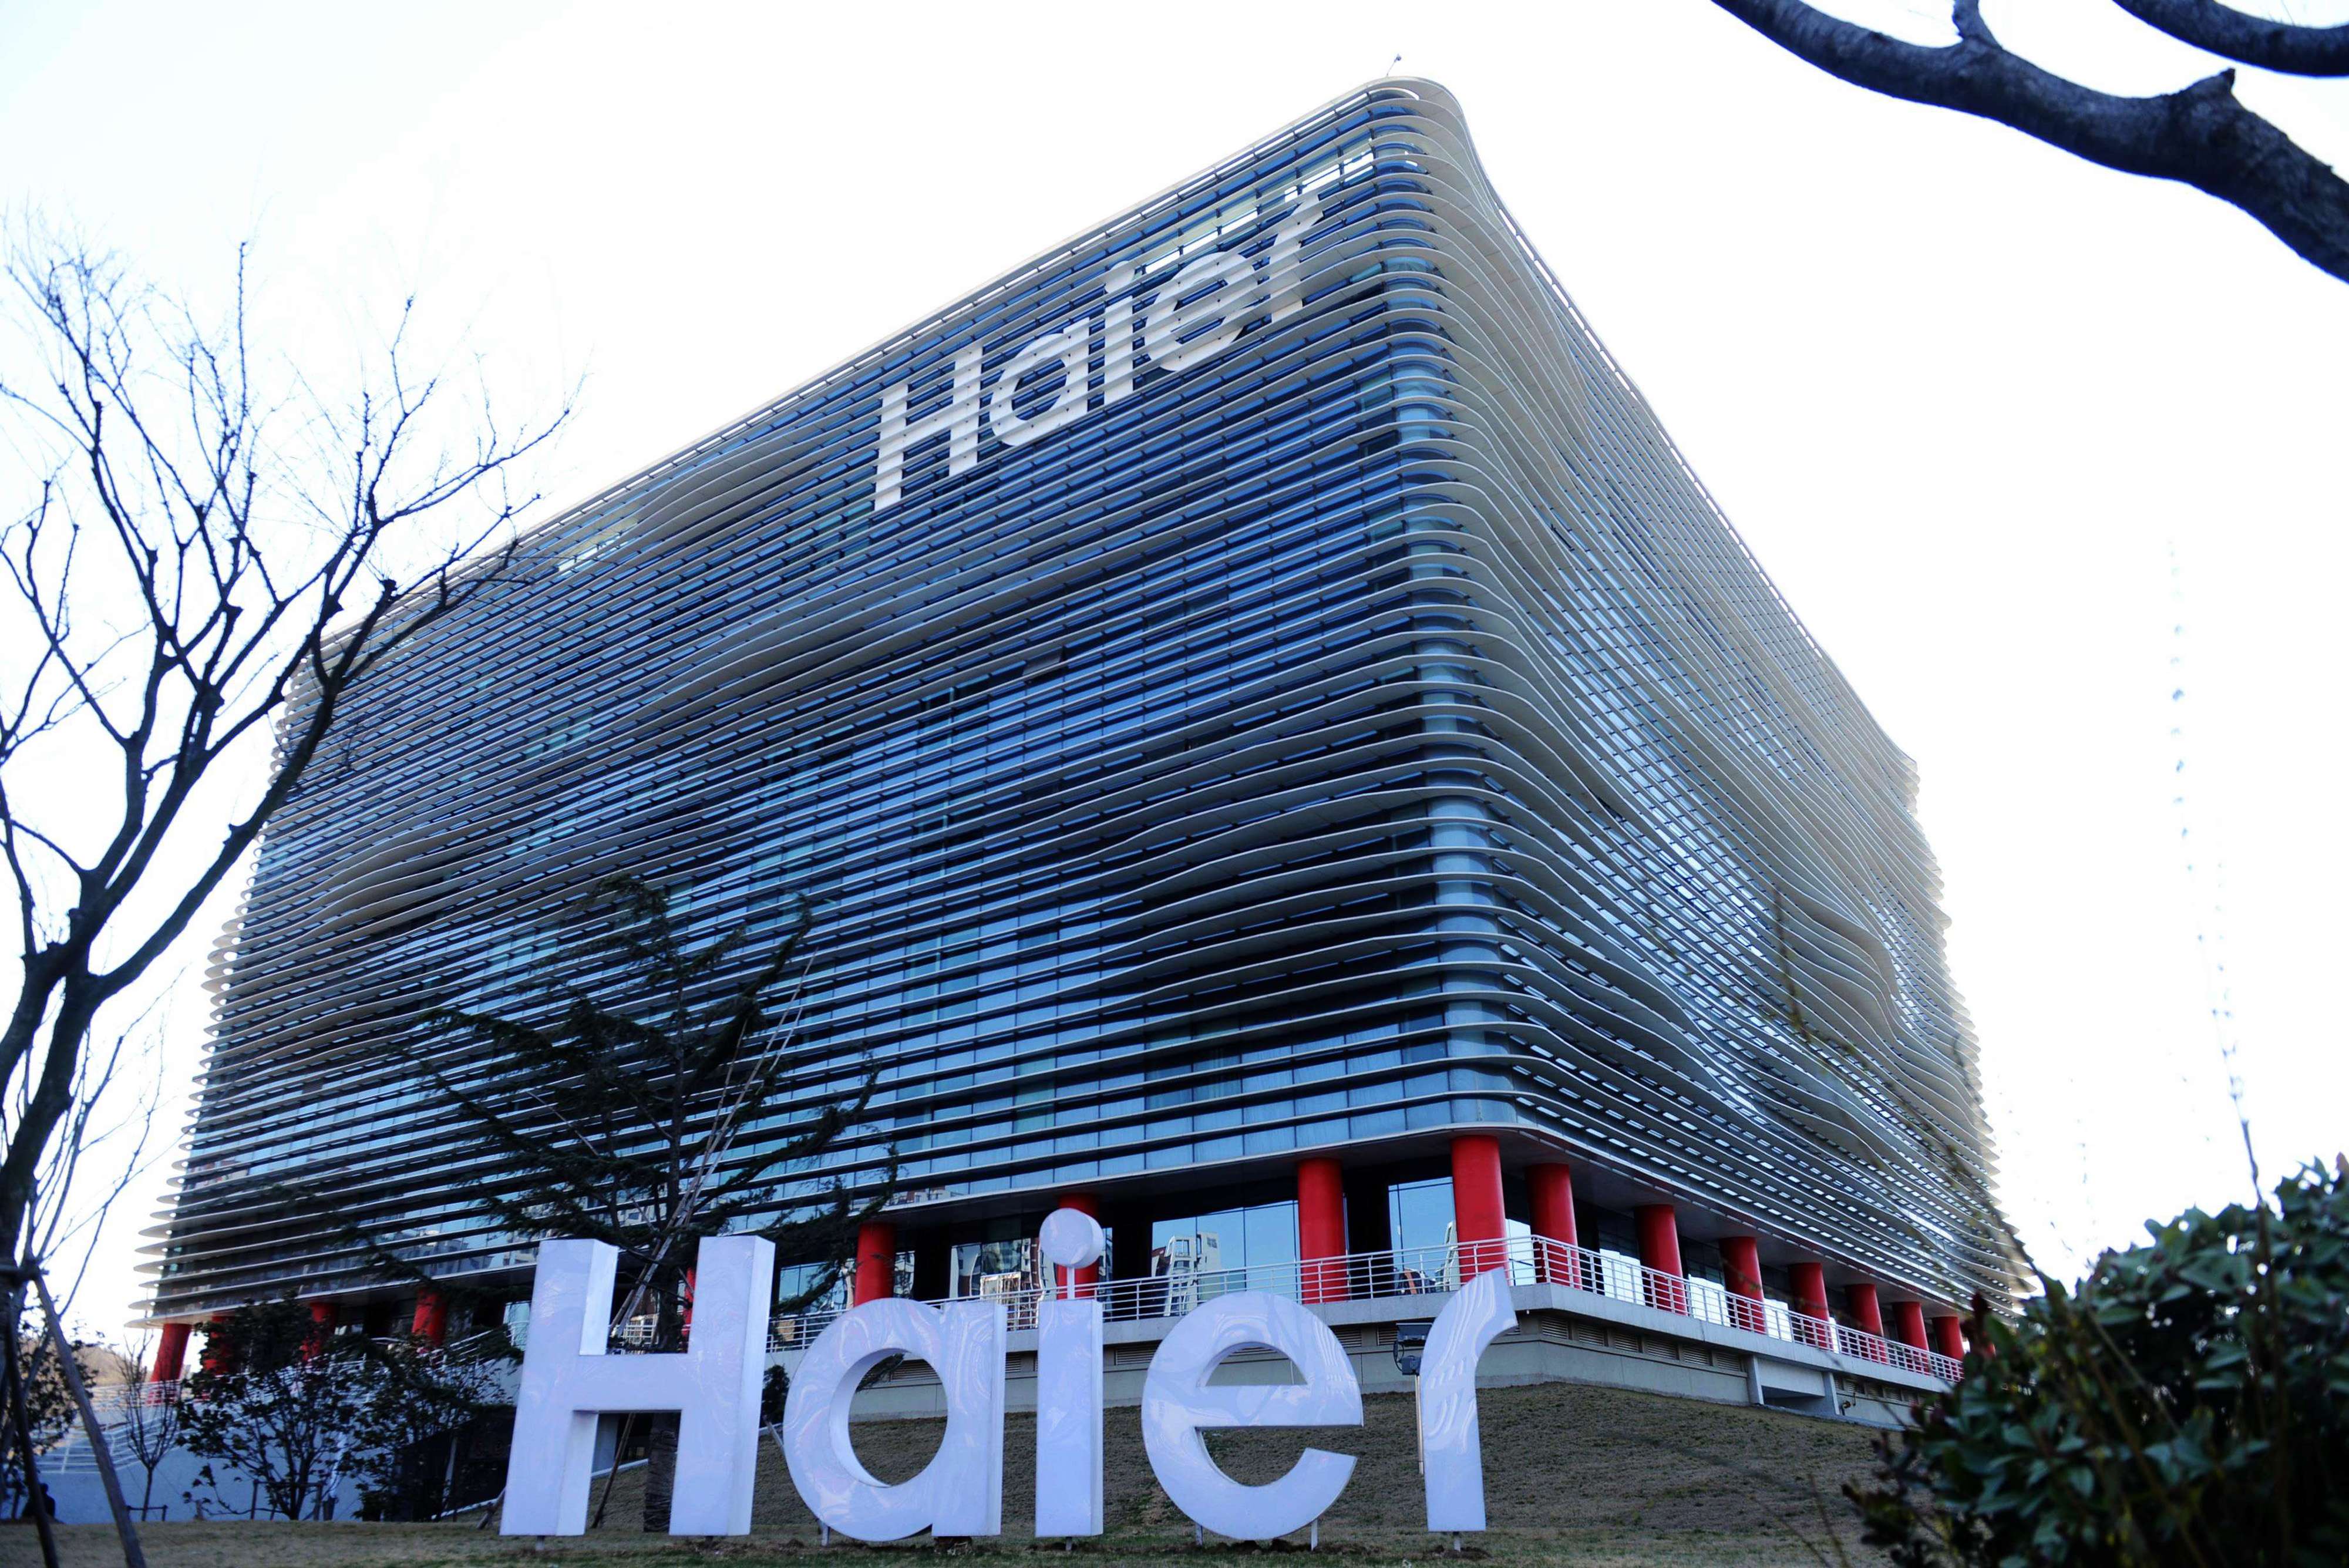 The headquarters in Qingdao of Haier Group, whose US$5.6 billion takeover of General Electric’s appliance business was completed in June. Photo: AP